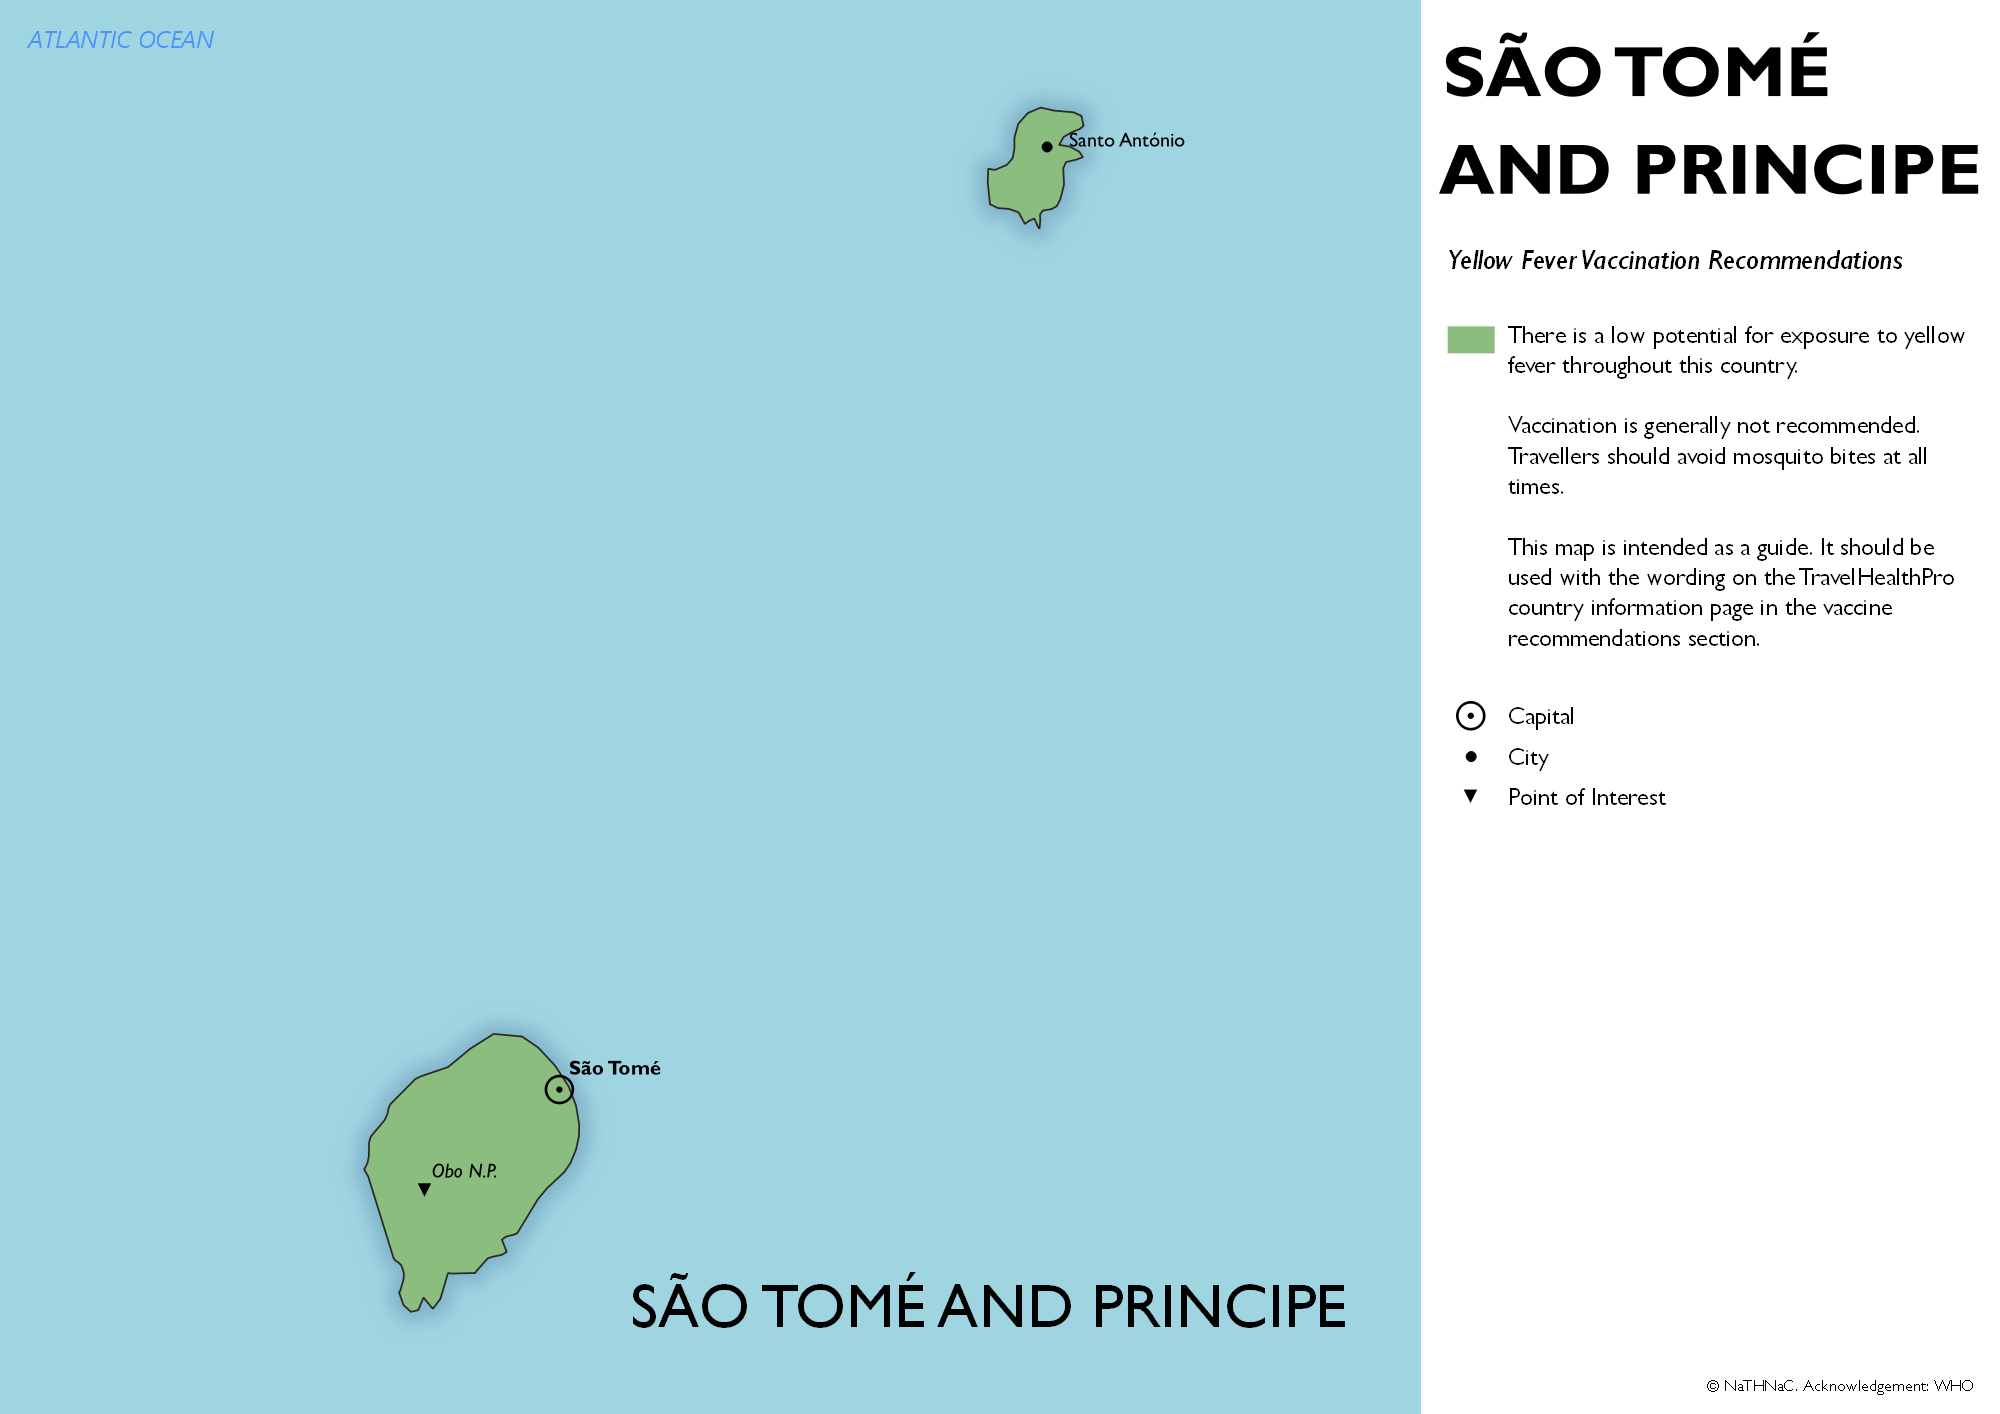 Yellow fever vaccine recommendation map for Sao Tome and Principe